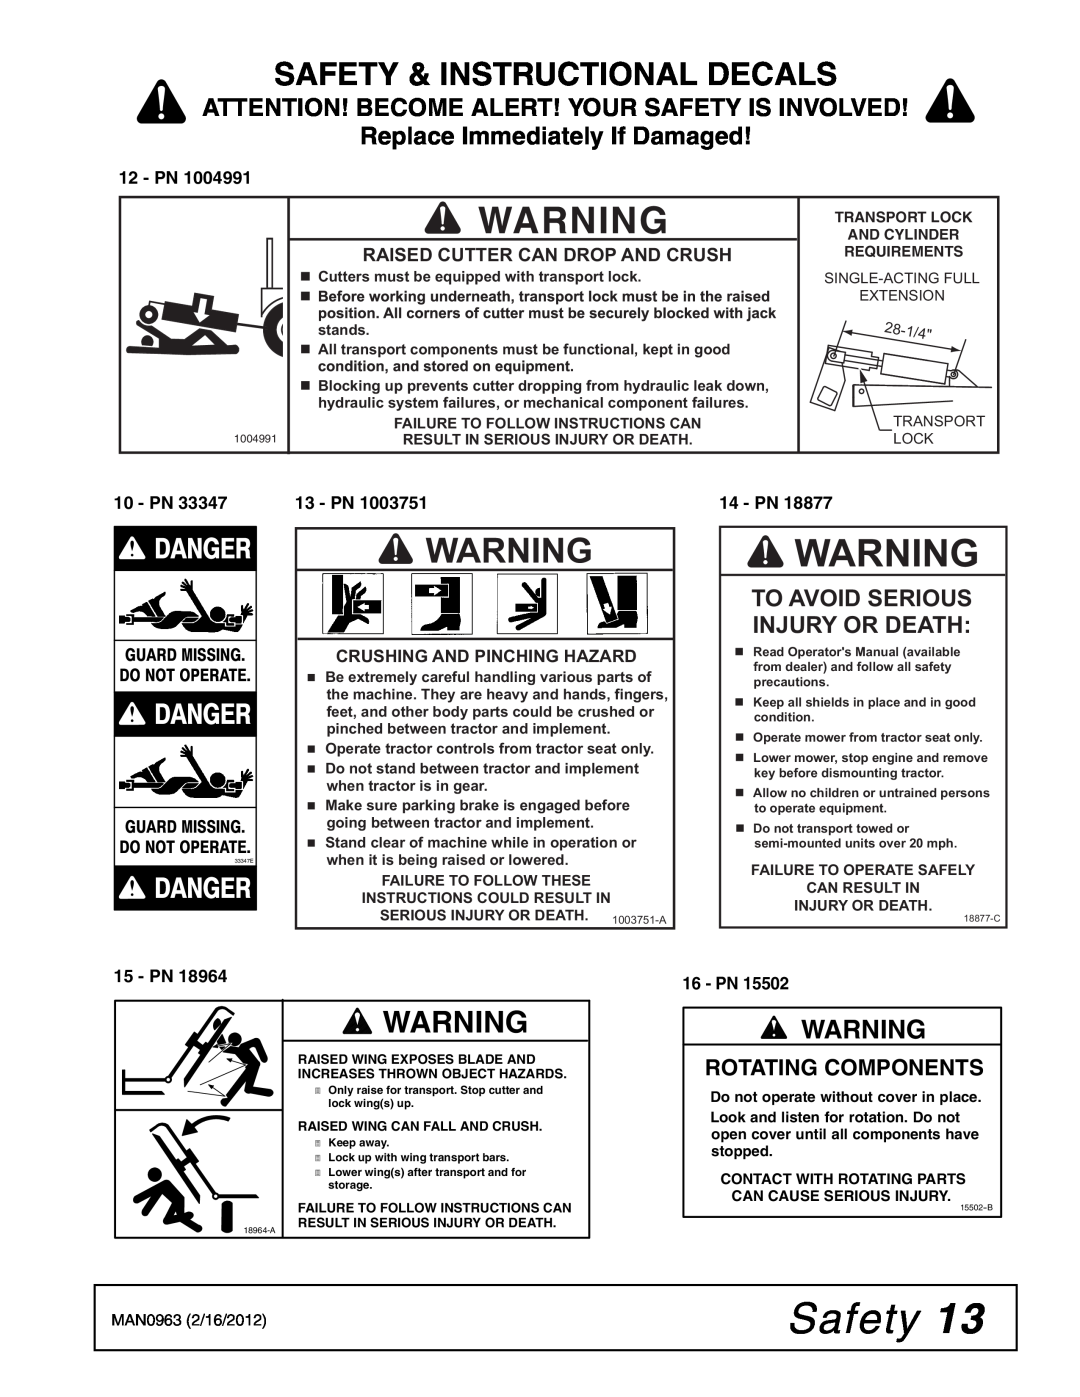 Woods Equipment BW180XHD Safety & Instructional Decals, 33347E, Attention! Become Alert! Your Safety Is Involved, Pn 